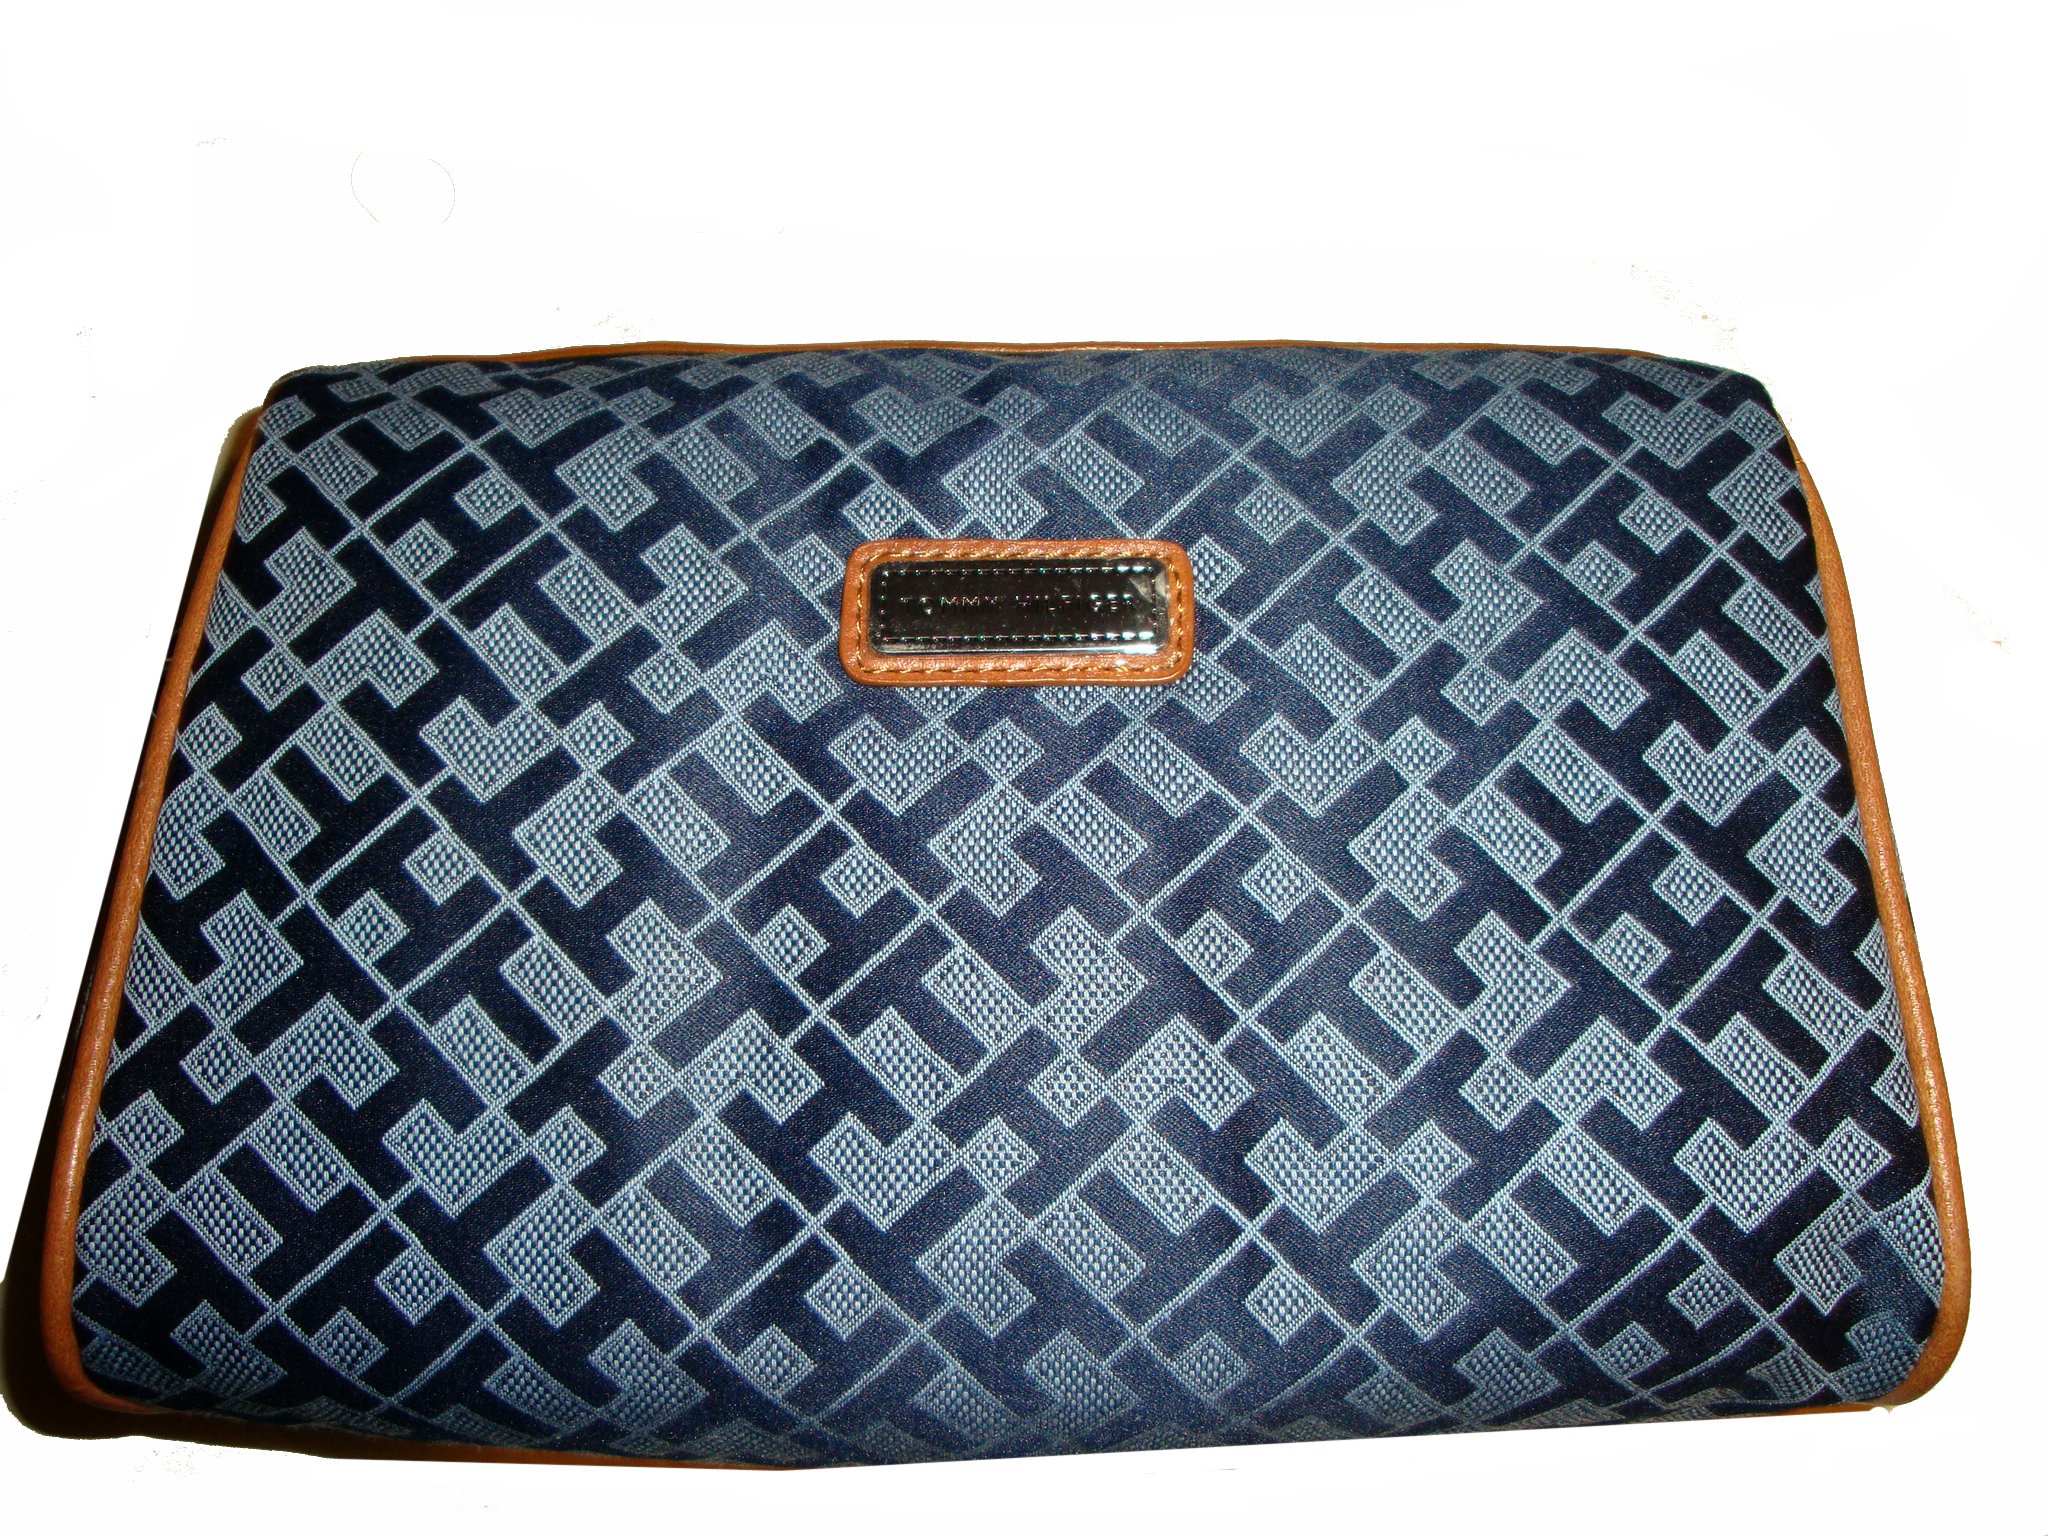 Tommy Hilfiger Women's Cosmetic/Make-up/Toiletry Bag, Navy/Light Blue Alpaca